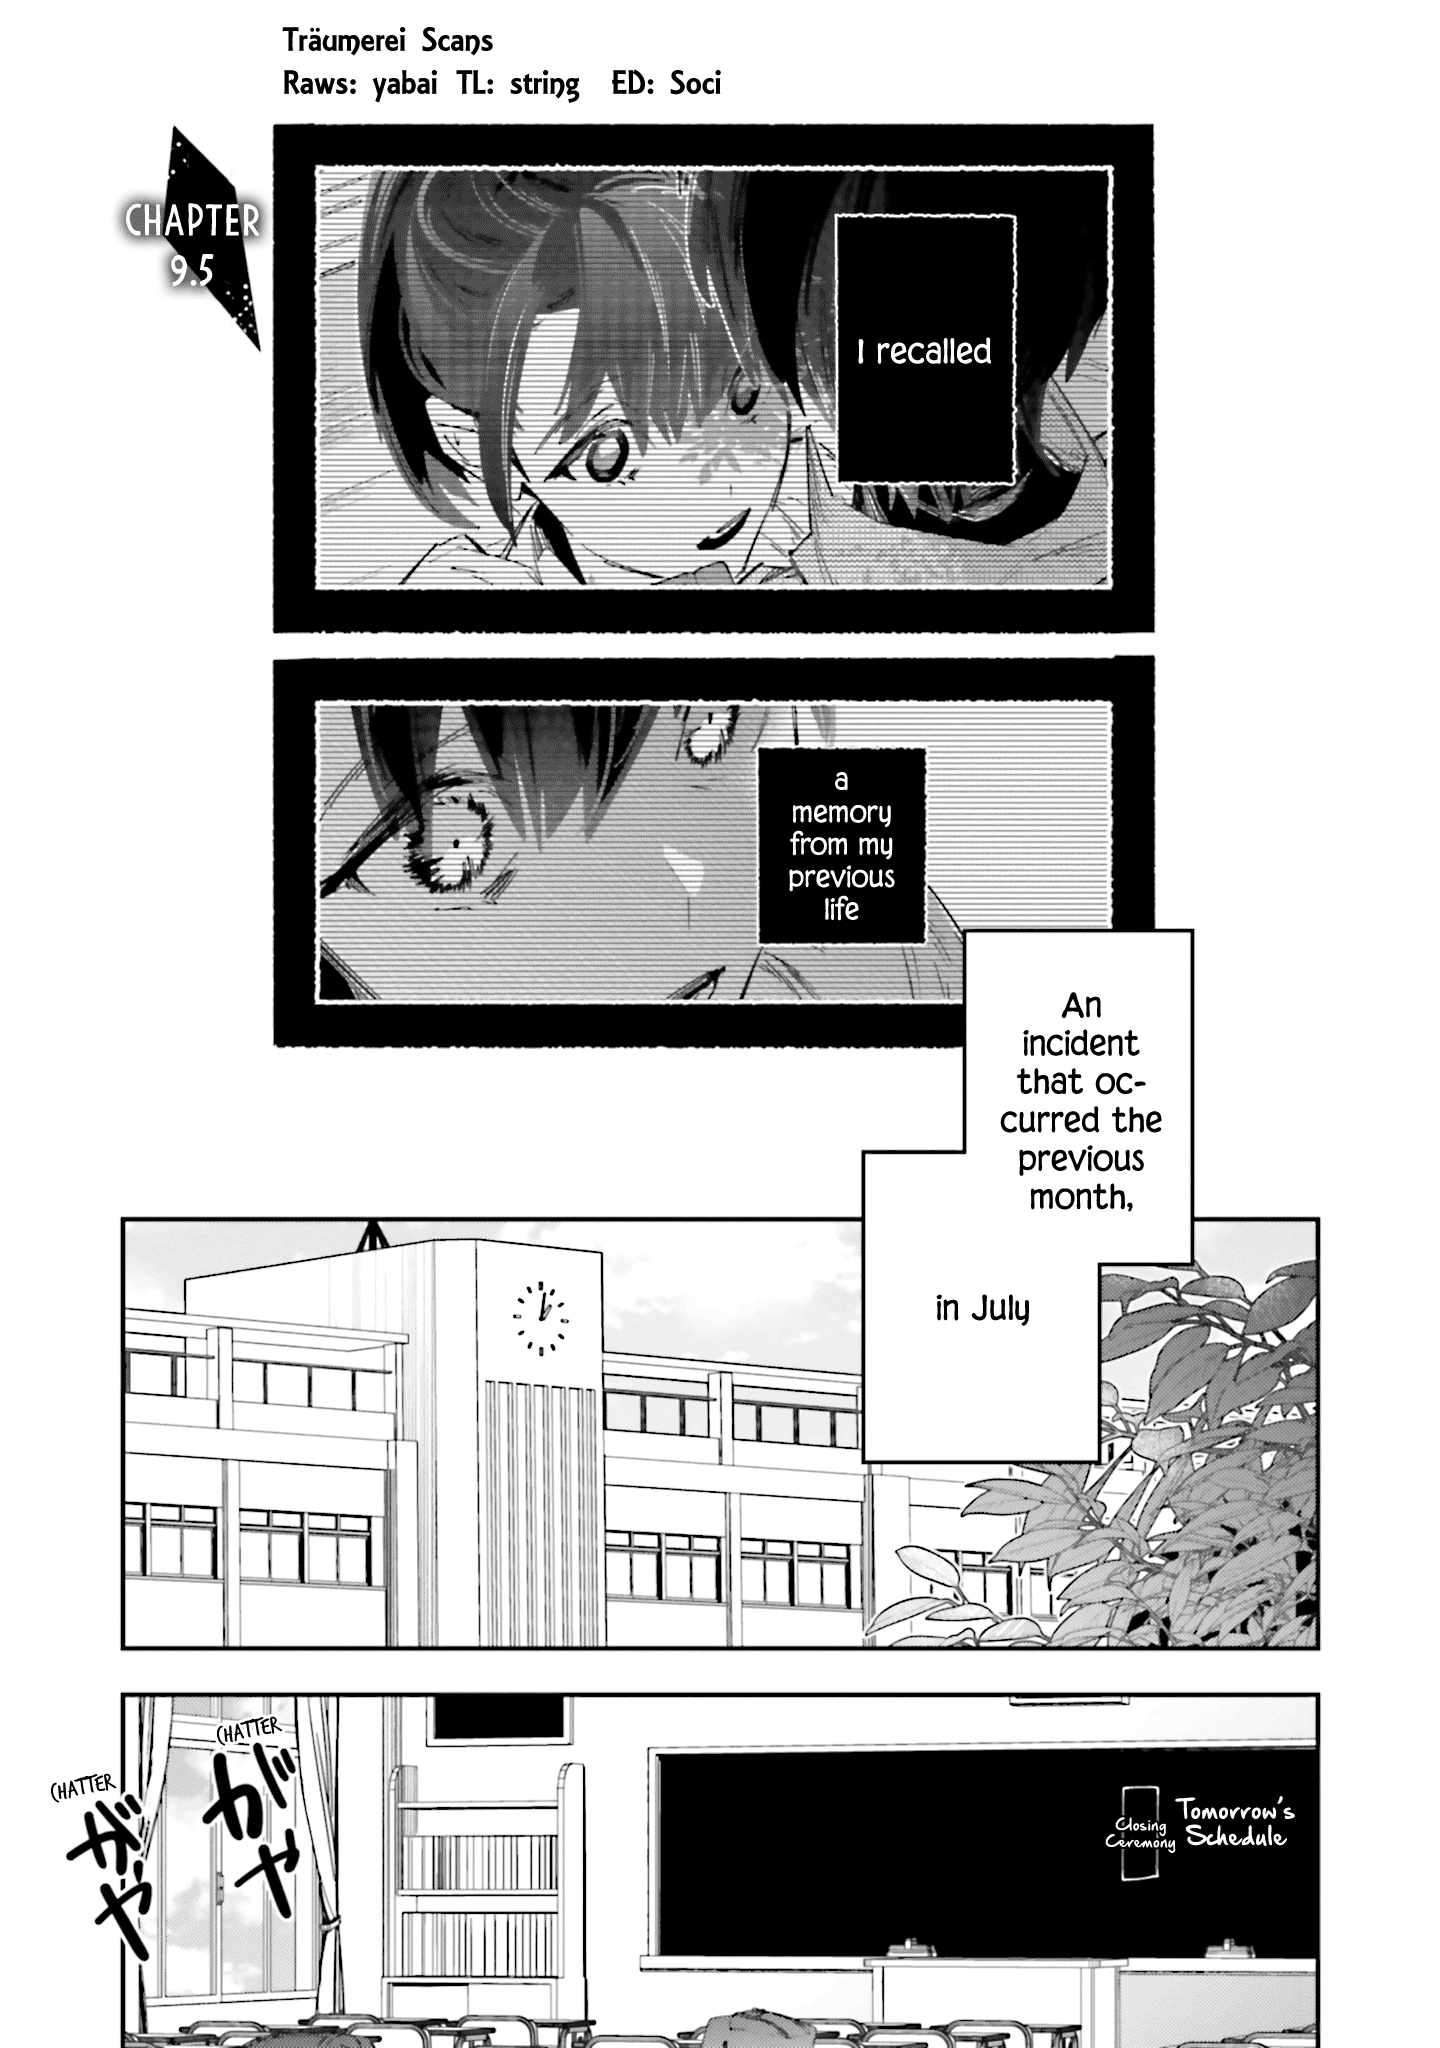 I Reincarnated As The Little Sister Of A Death Game Manga’S Murd3R Mastermind And Failed - chapter 13.5 - #1